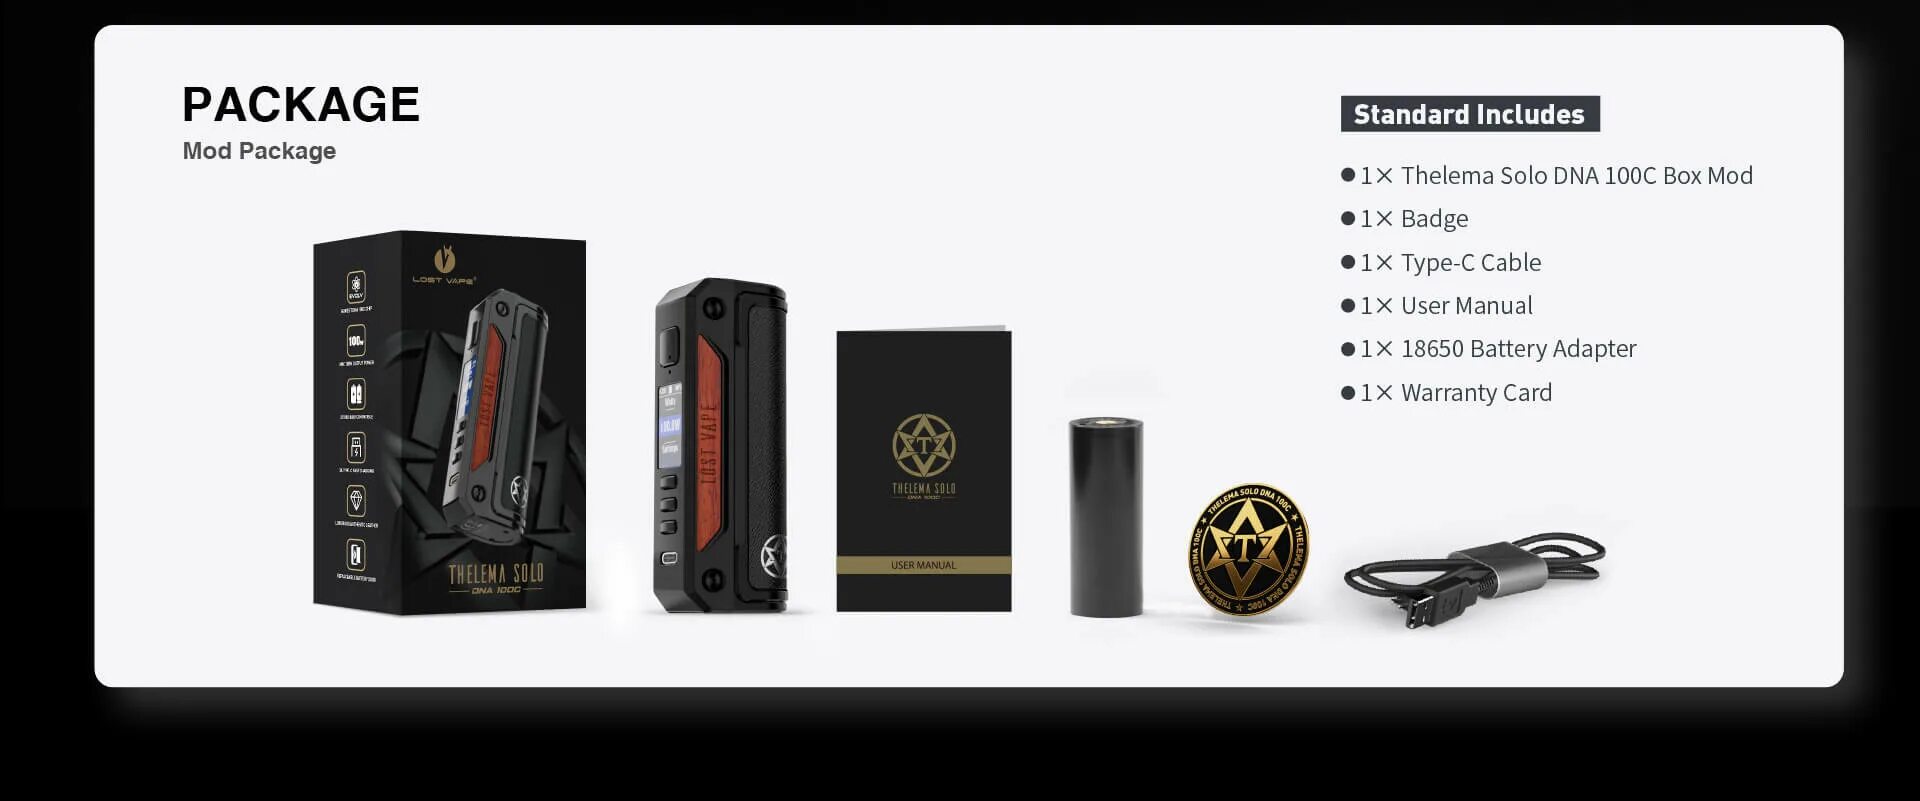 Thelema solo DNA 100c Box Mod. Thelema solo 100w. Lost Vape Thelema solo 100w Box Mod. Боксмод Hyperion DNA 100c Mod.